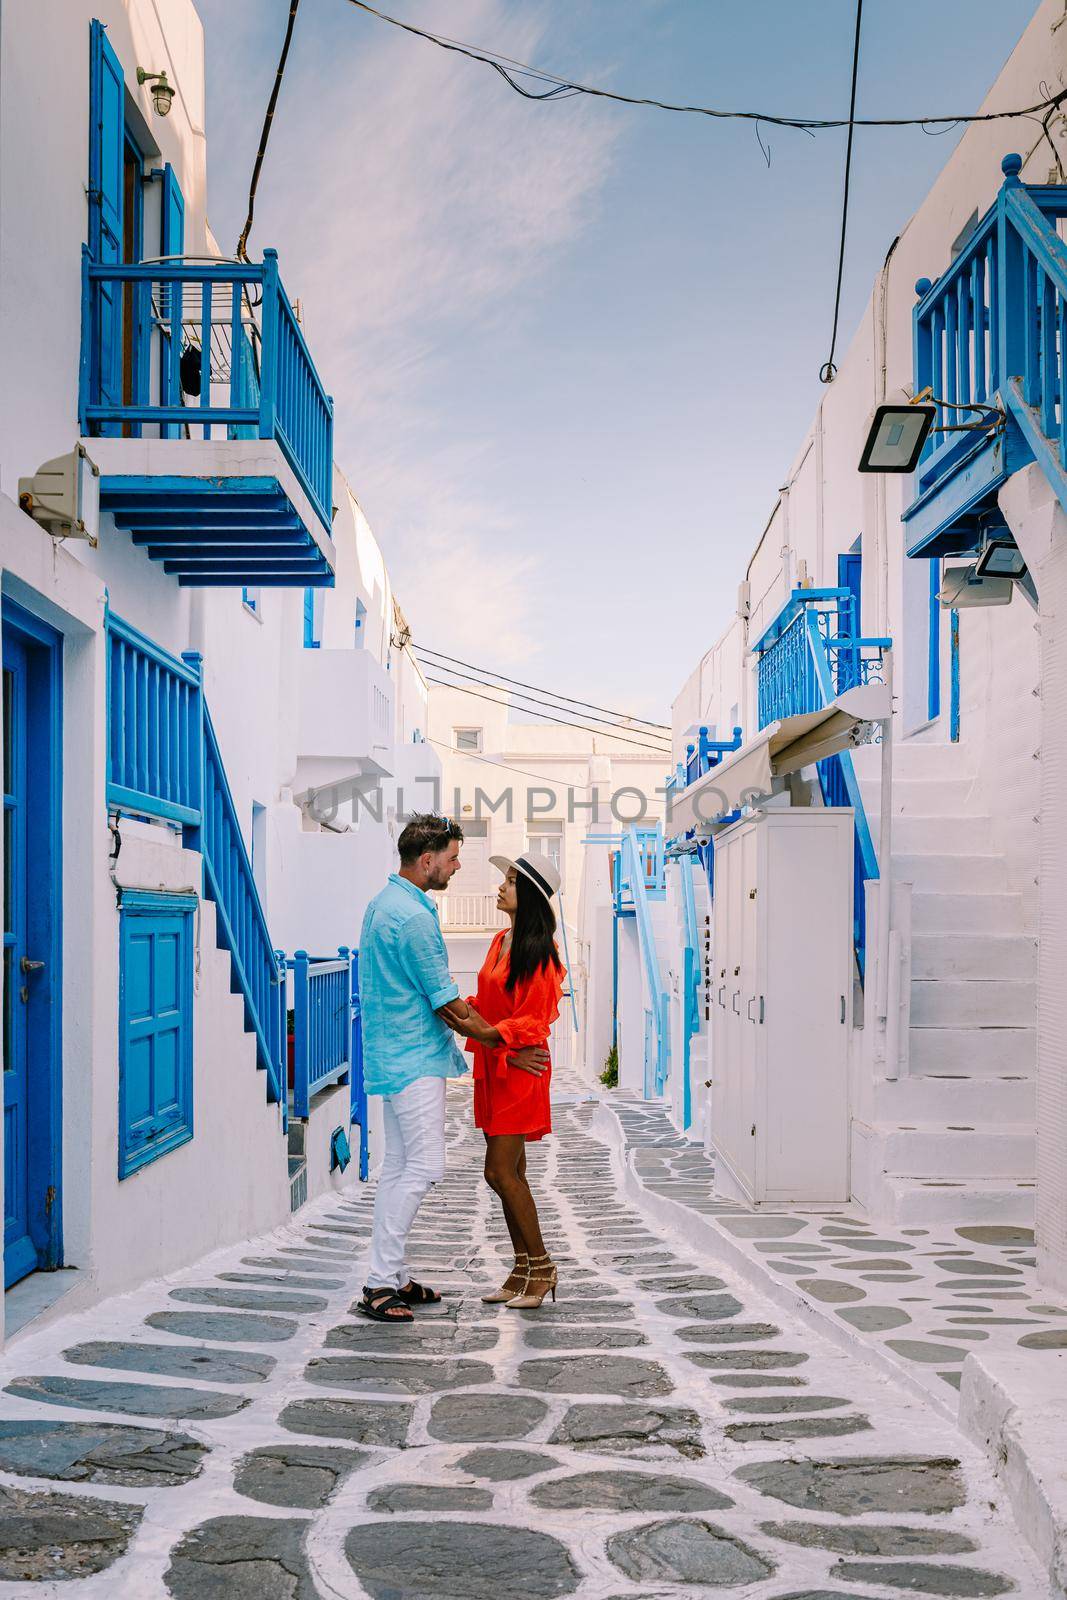 Mykonos Greece, Young man and woman in dress at the Streets of old town Mikonos during vacation in Greece, Little Venice Mykonos Greece by fokkebok